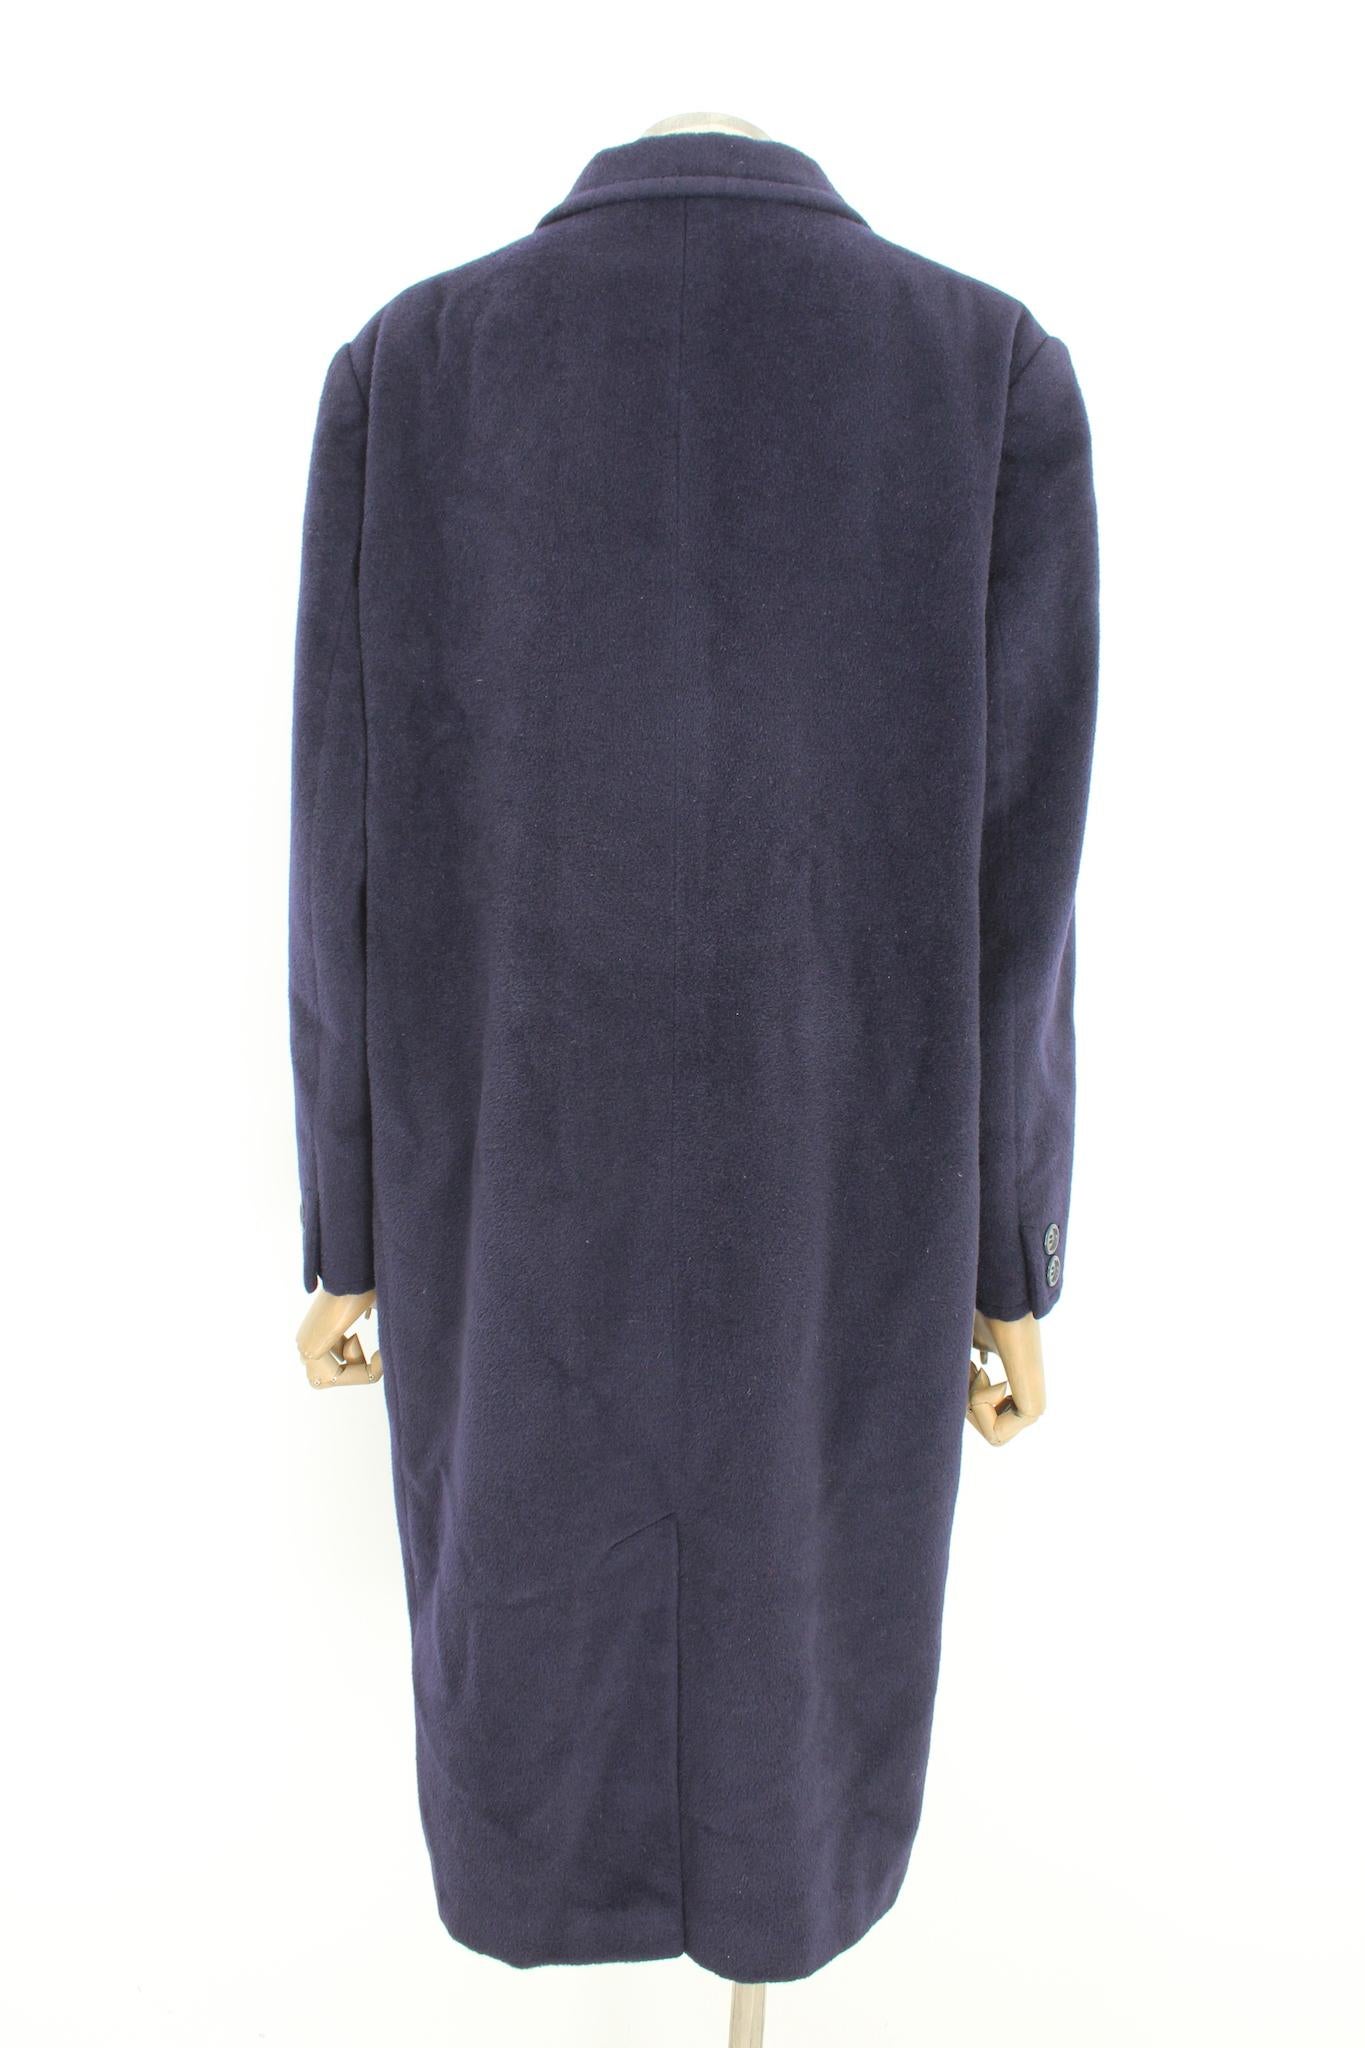 This item is a 90s vintage coat from the brand Max Mara. The coat is made of high-quality wool and comes in a classic blue color. The style of the coat is timeless and elegant, making it a versatile piece for any wardrobe. It is perfect for keeping